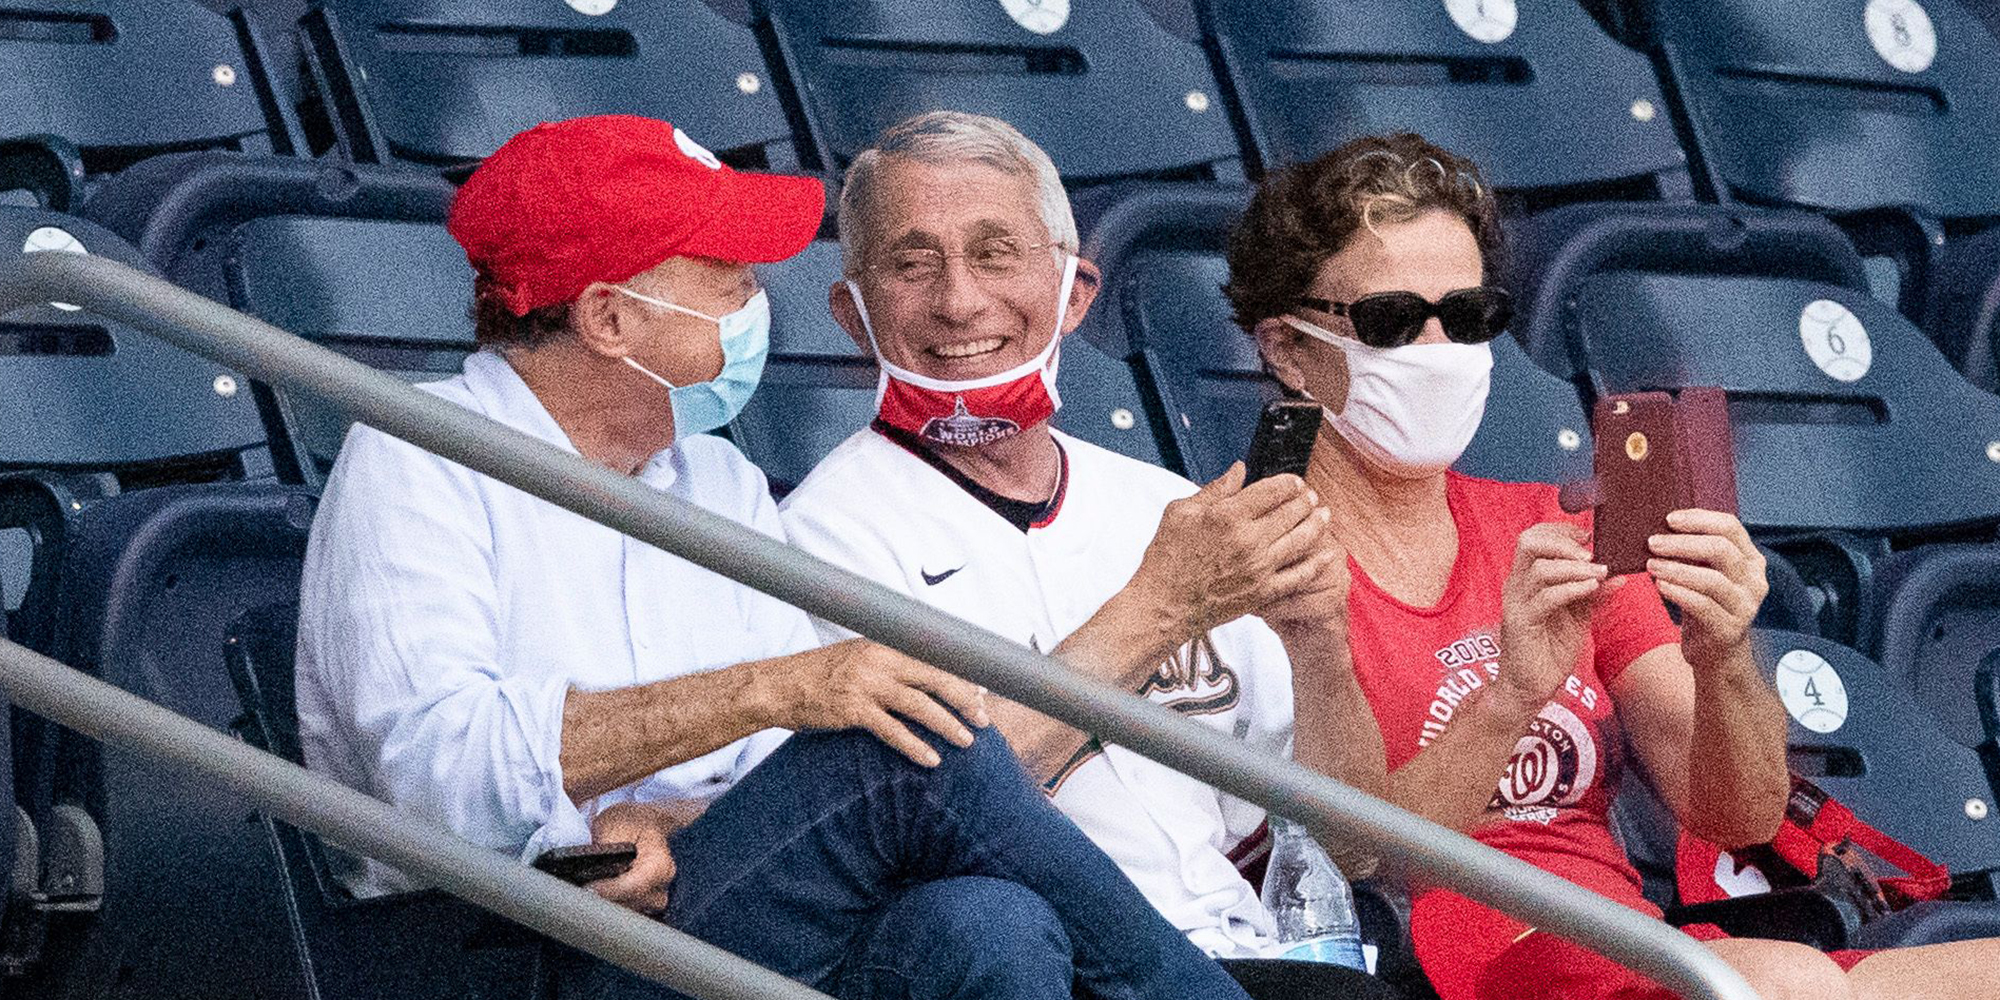 fauci-without-mask-nationals-game-DO-NOT-REUSE.jpg